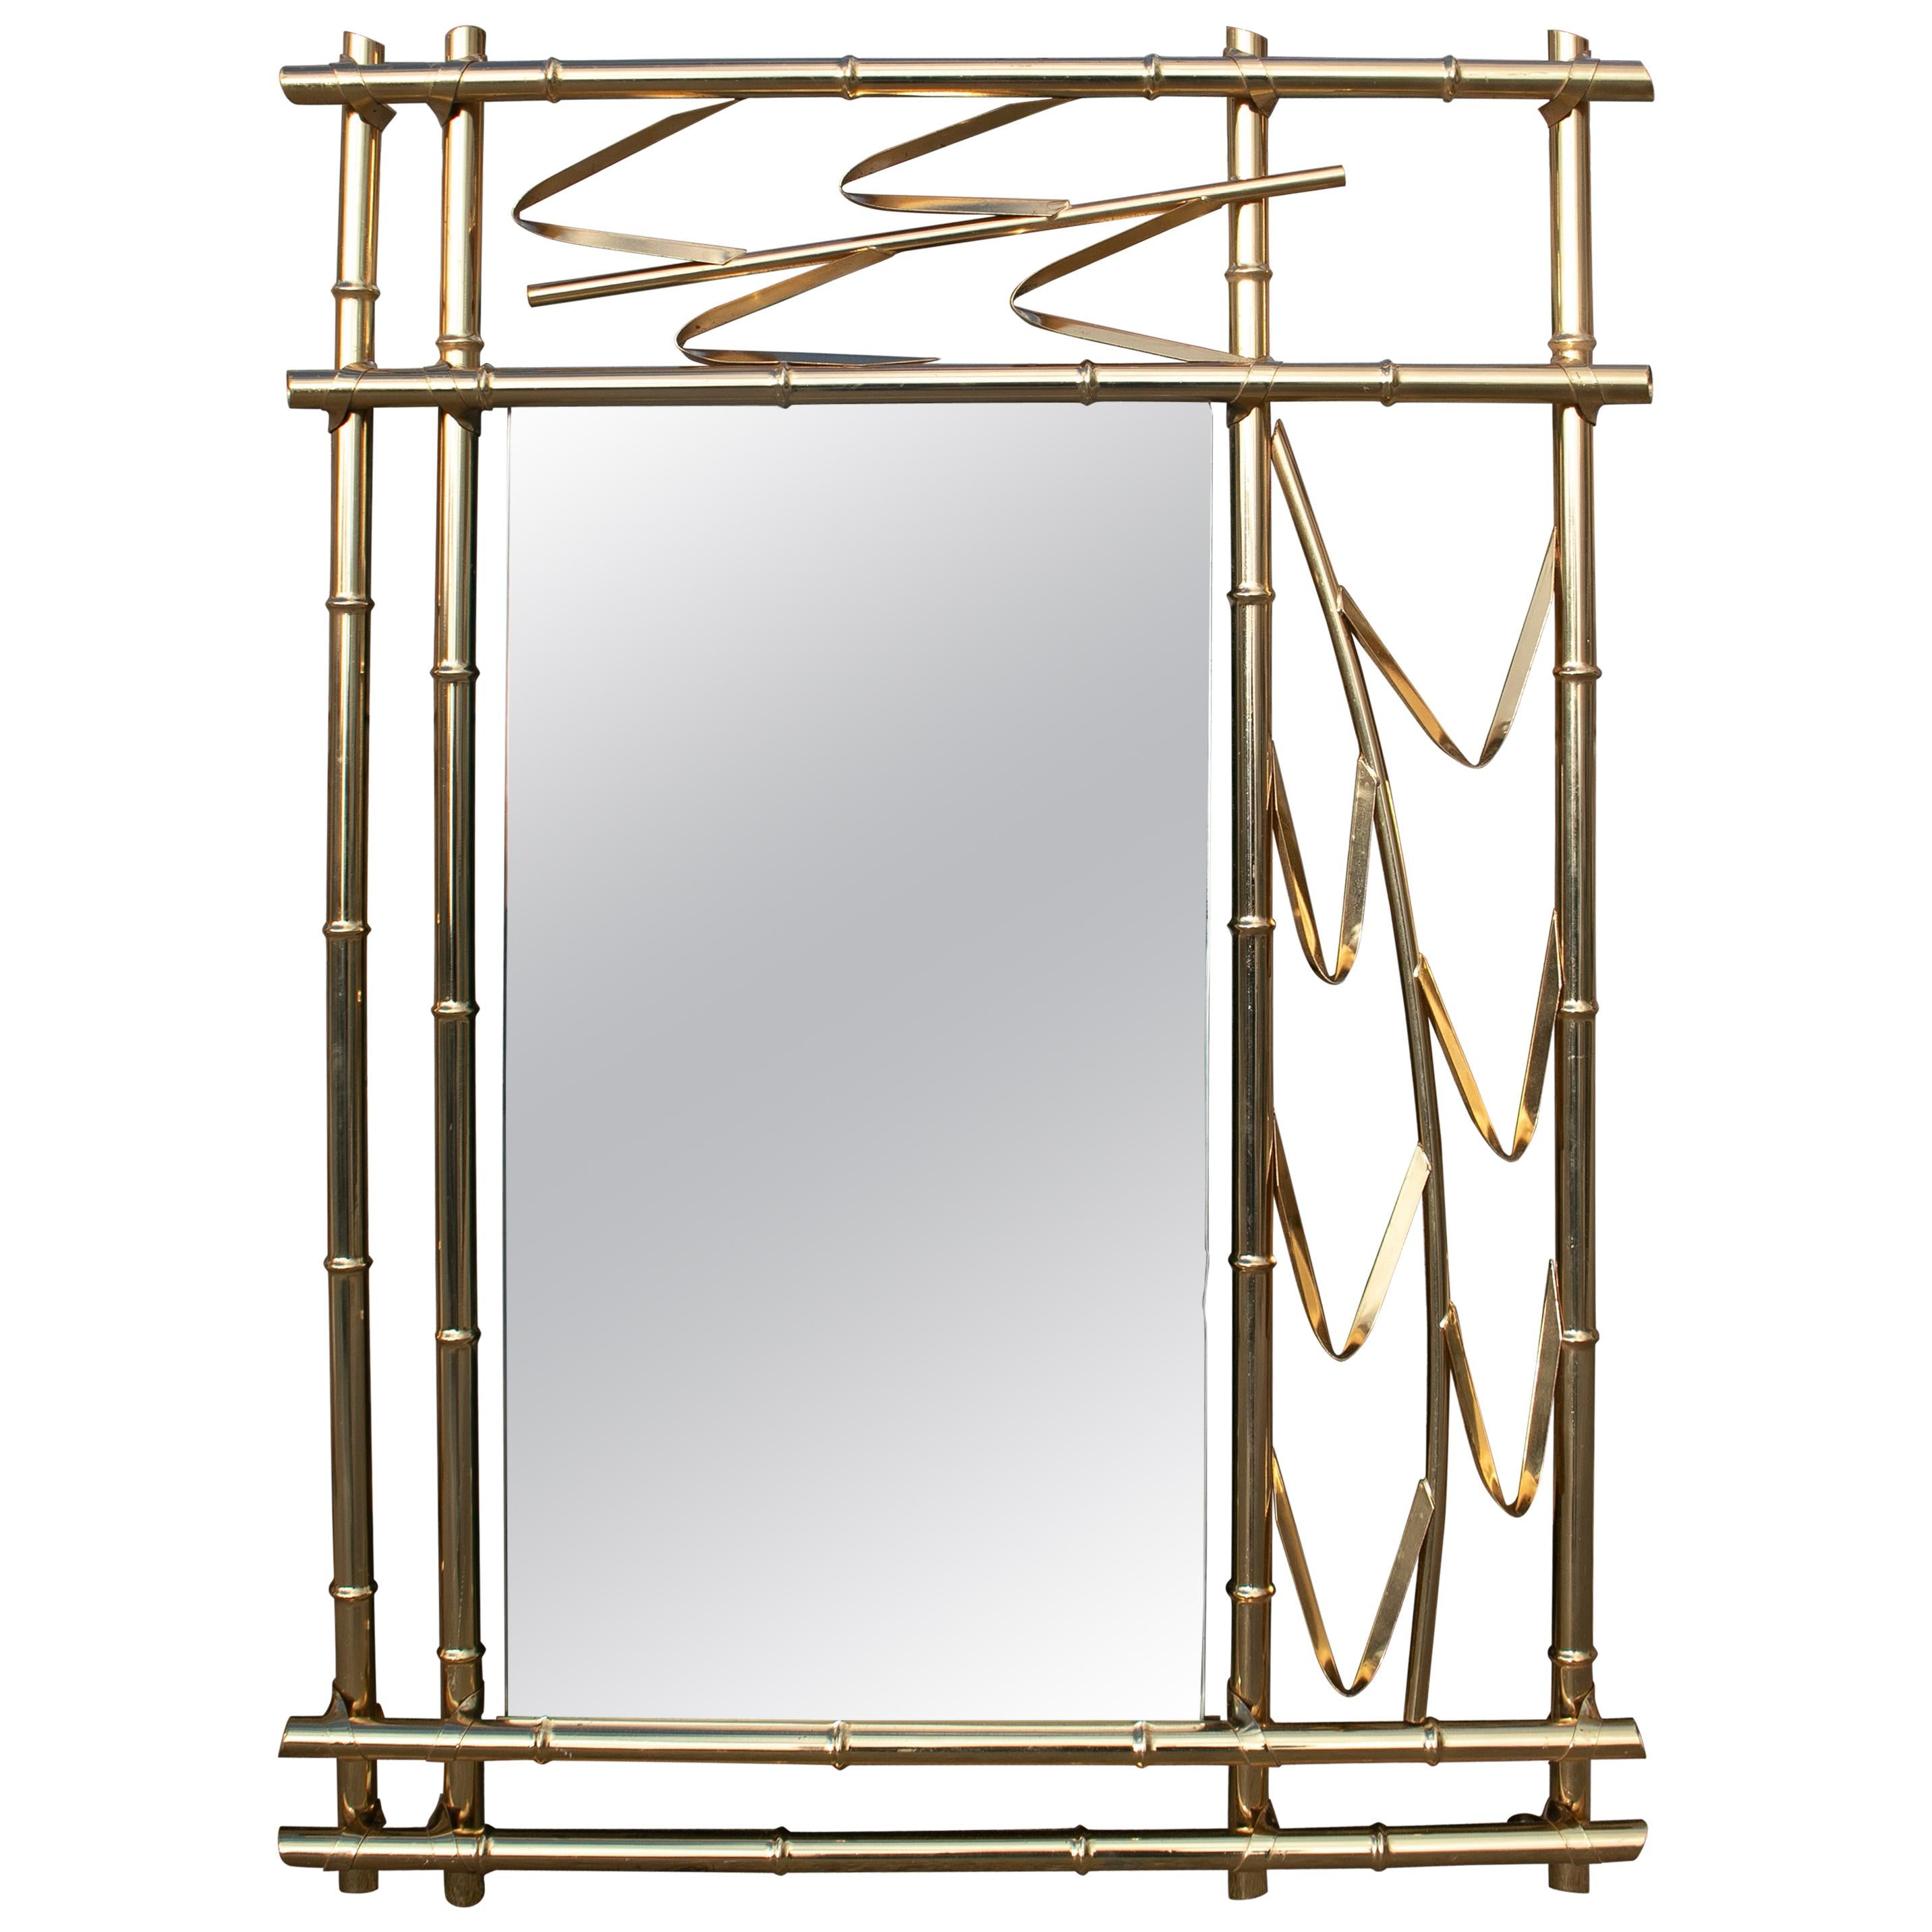 1970s Spanish Faux Bamboo Golden Iron Mirror For Sale